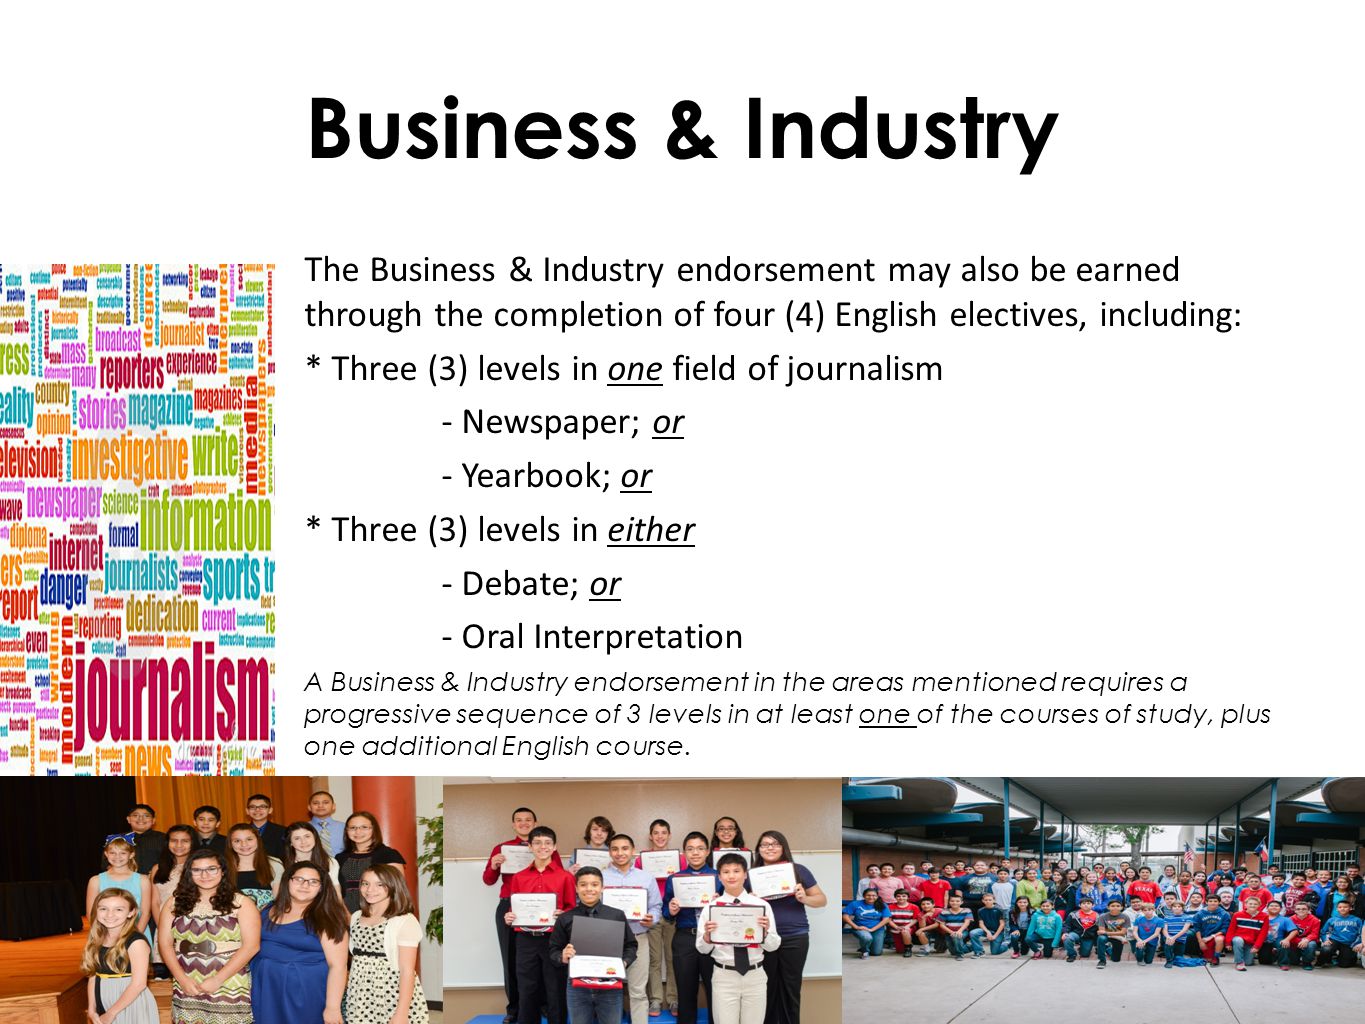 Business & Industry The Business & Industry endorsement may also be earned through the completion of four (4) English electives, including: * Three (3) levels in one field of journalism - Newspaper; or - Yearbook; or * Three (3) levels in either - Debate; or - Oral Interpretation A Business & Industry endorsement in the areas mentioned requires a progressive sequence of 3 levels in at least one of the courses of study, plus one additional English course.